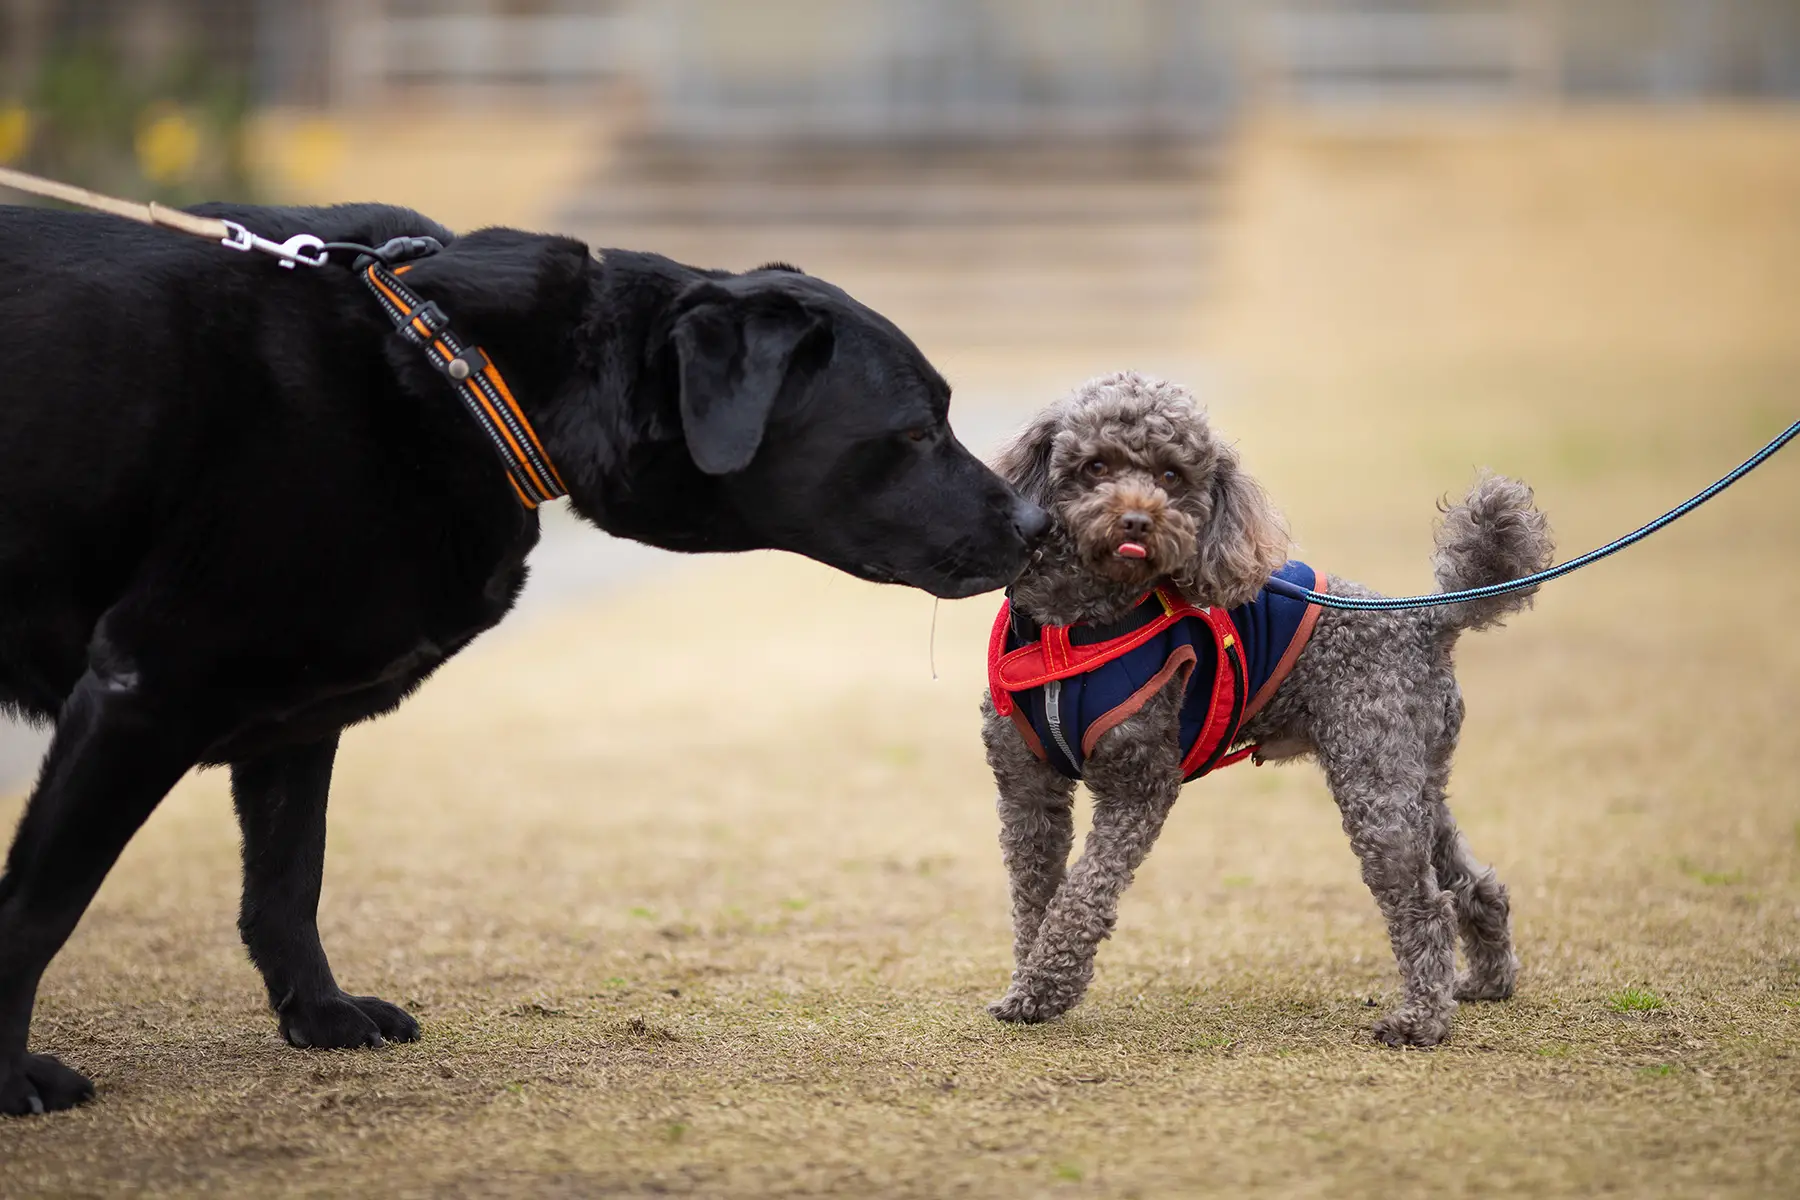 A large black dog and a medium-sized curly gray dog, both on leads, meet in the park